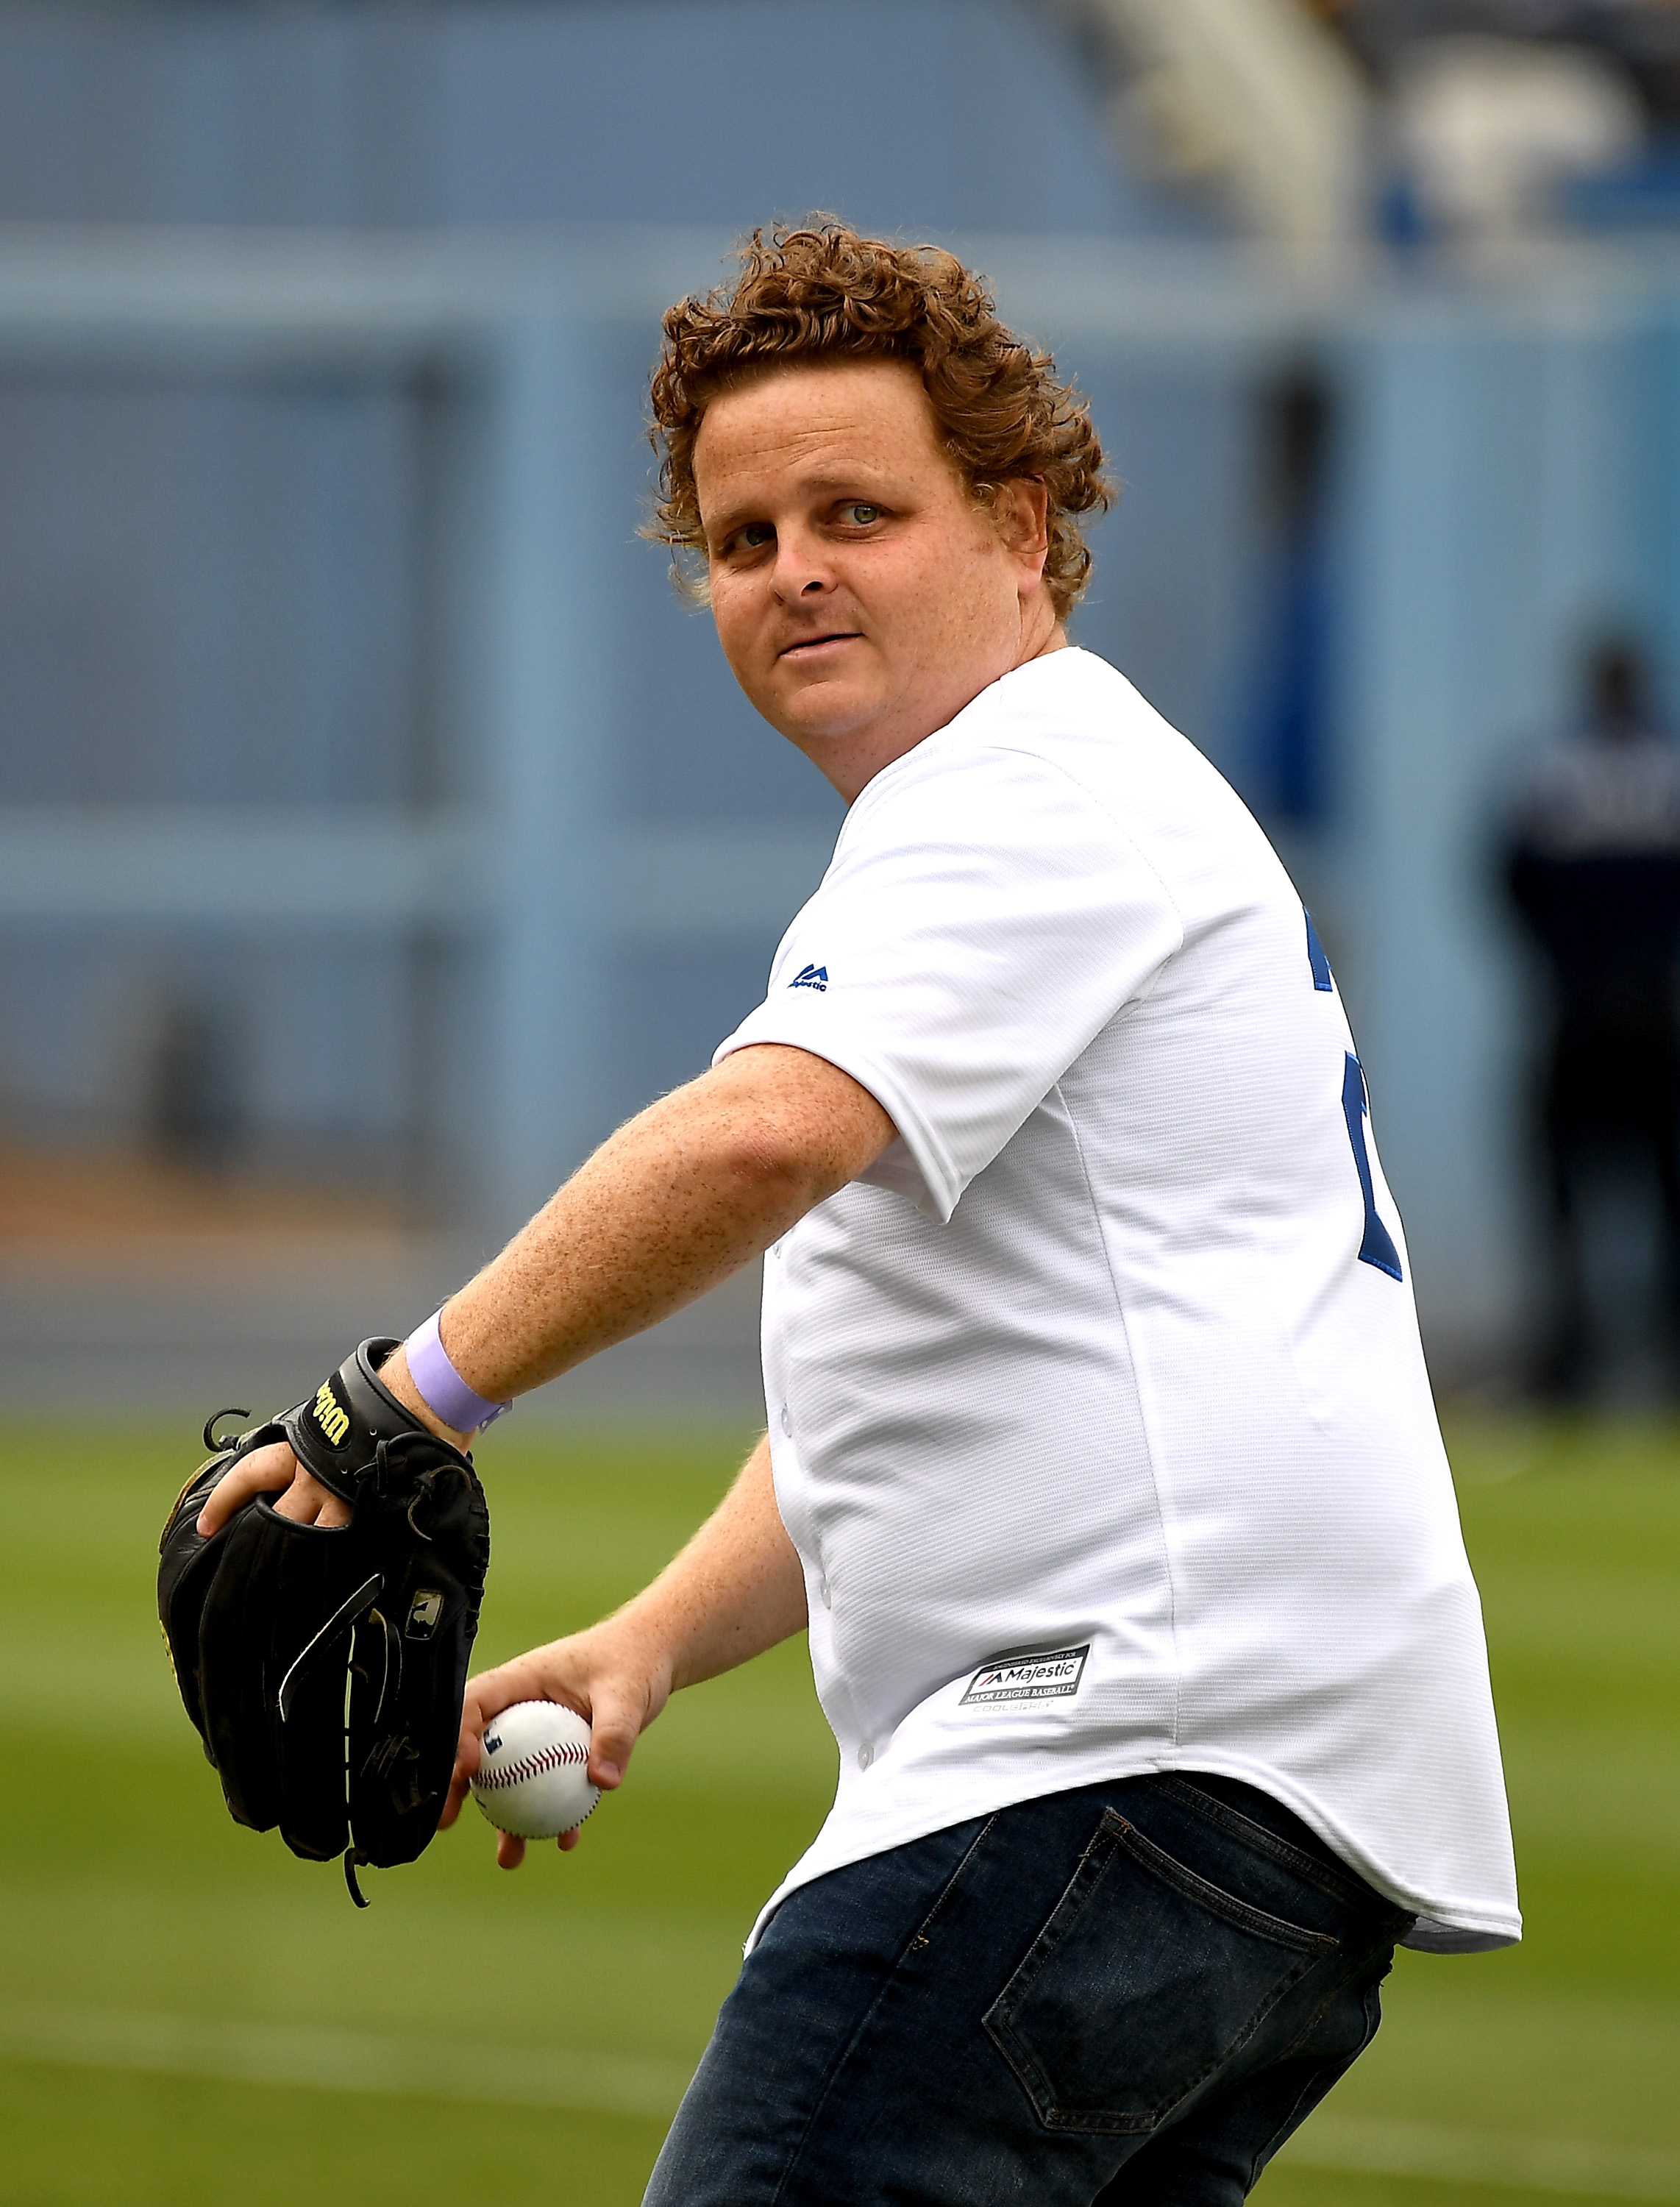 Patrick Renna throws out the first pitch during a cast reunion of the "The Sandlot" to celebrate the movie's 25th anniversary before the game between the Los Angeles Dodgers and the San Francisco Giants at Dodger Stadium on June 16, 2018, in Los Angeles, California | Source: Getty Images